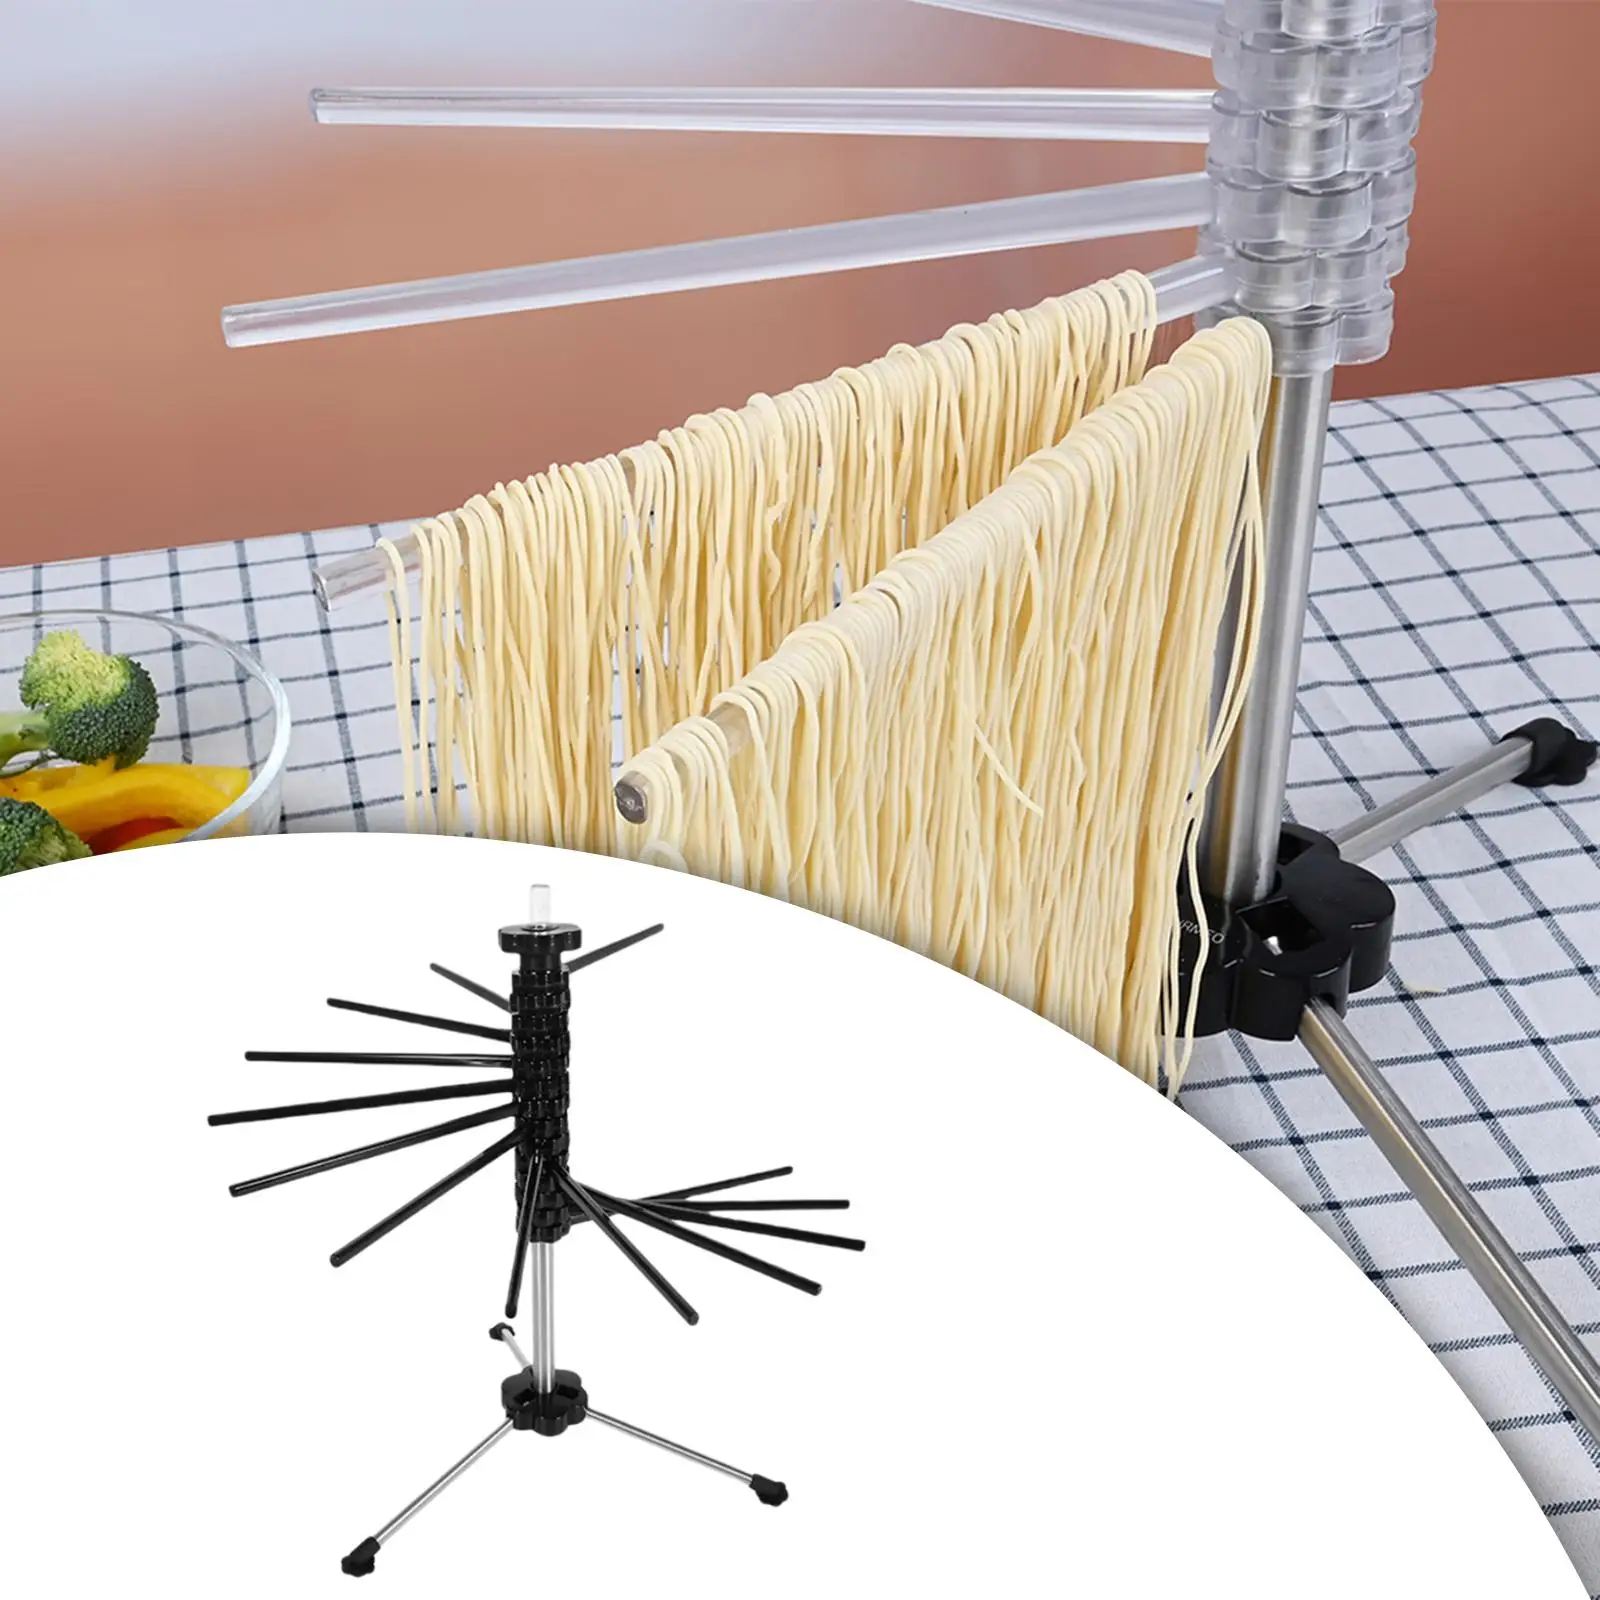 https://ae01.alicdn.com/kf/Sd7576f8a0554453c8a0a8f4423255f4fg/Collapsible-Pasta-Drying-Rack-with-14-Collapsible-Rods-for-Fresh-Pasta.jpg